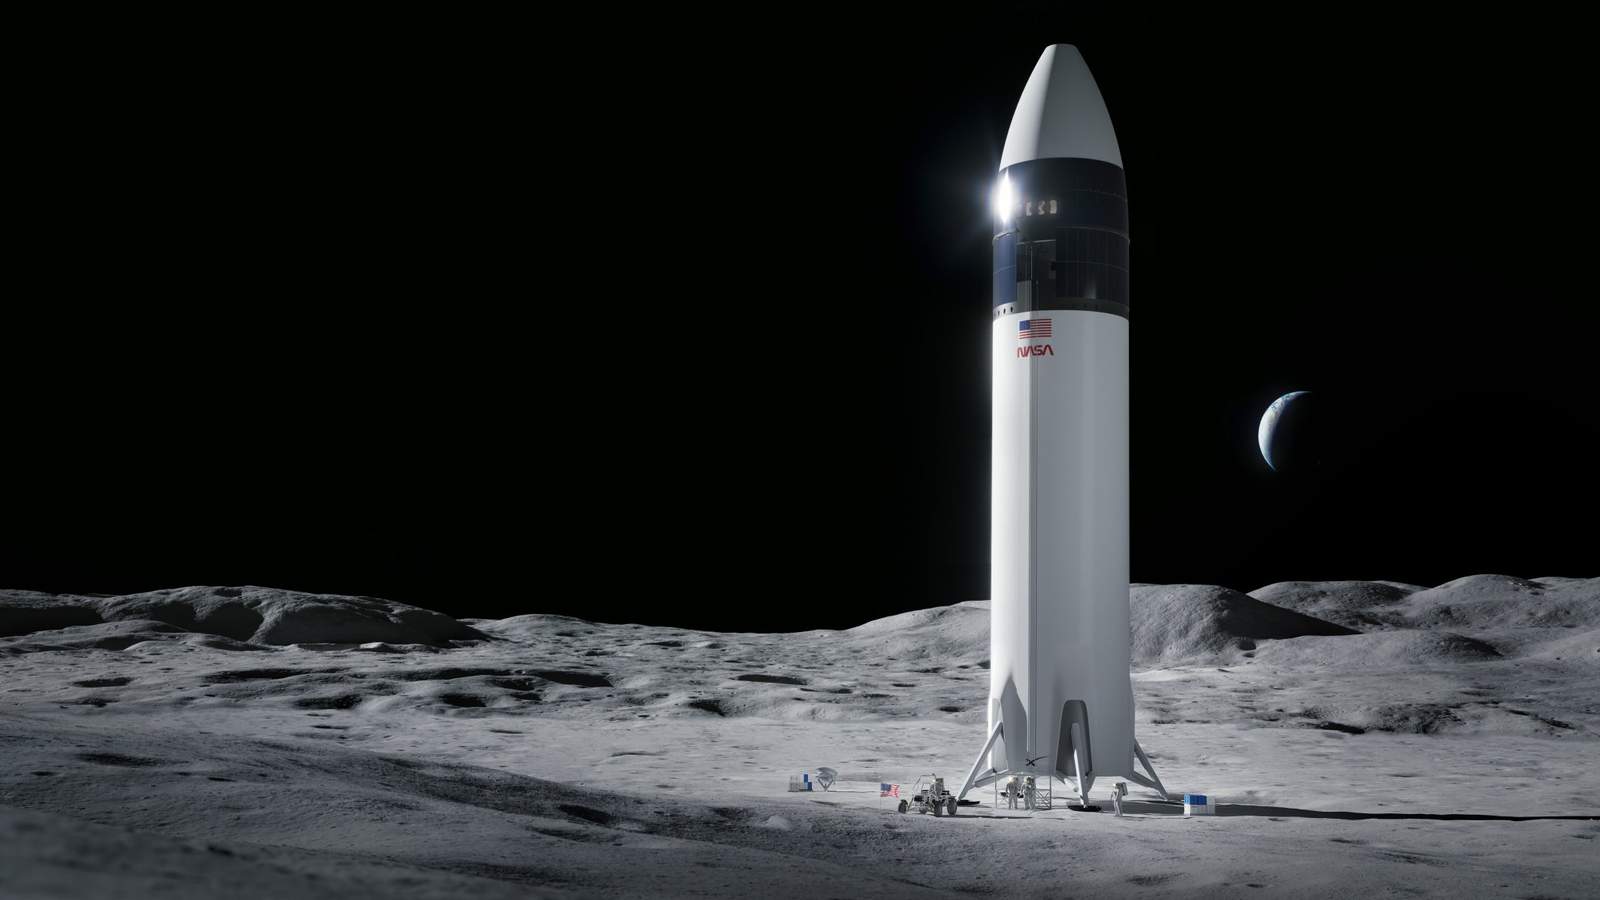 NASA selects SpaceX’s Starship to return astronauts to the moon